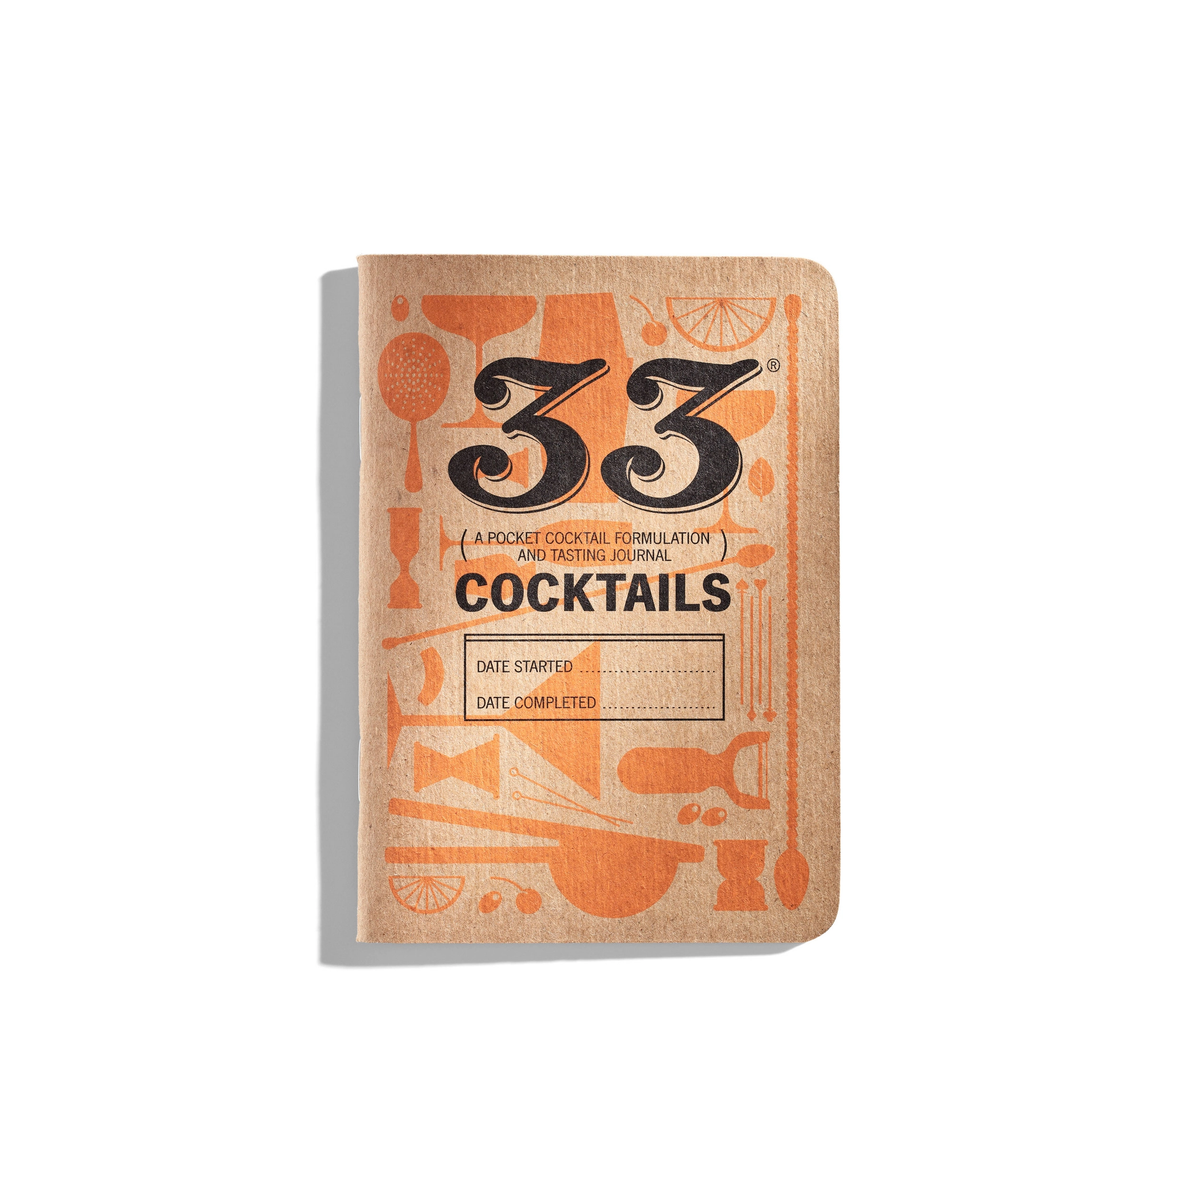 33 Books Cocktails - Heart of the Home LV